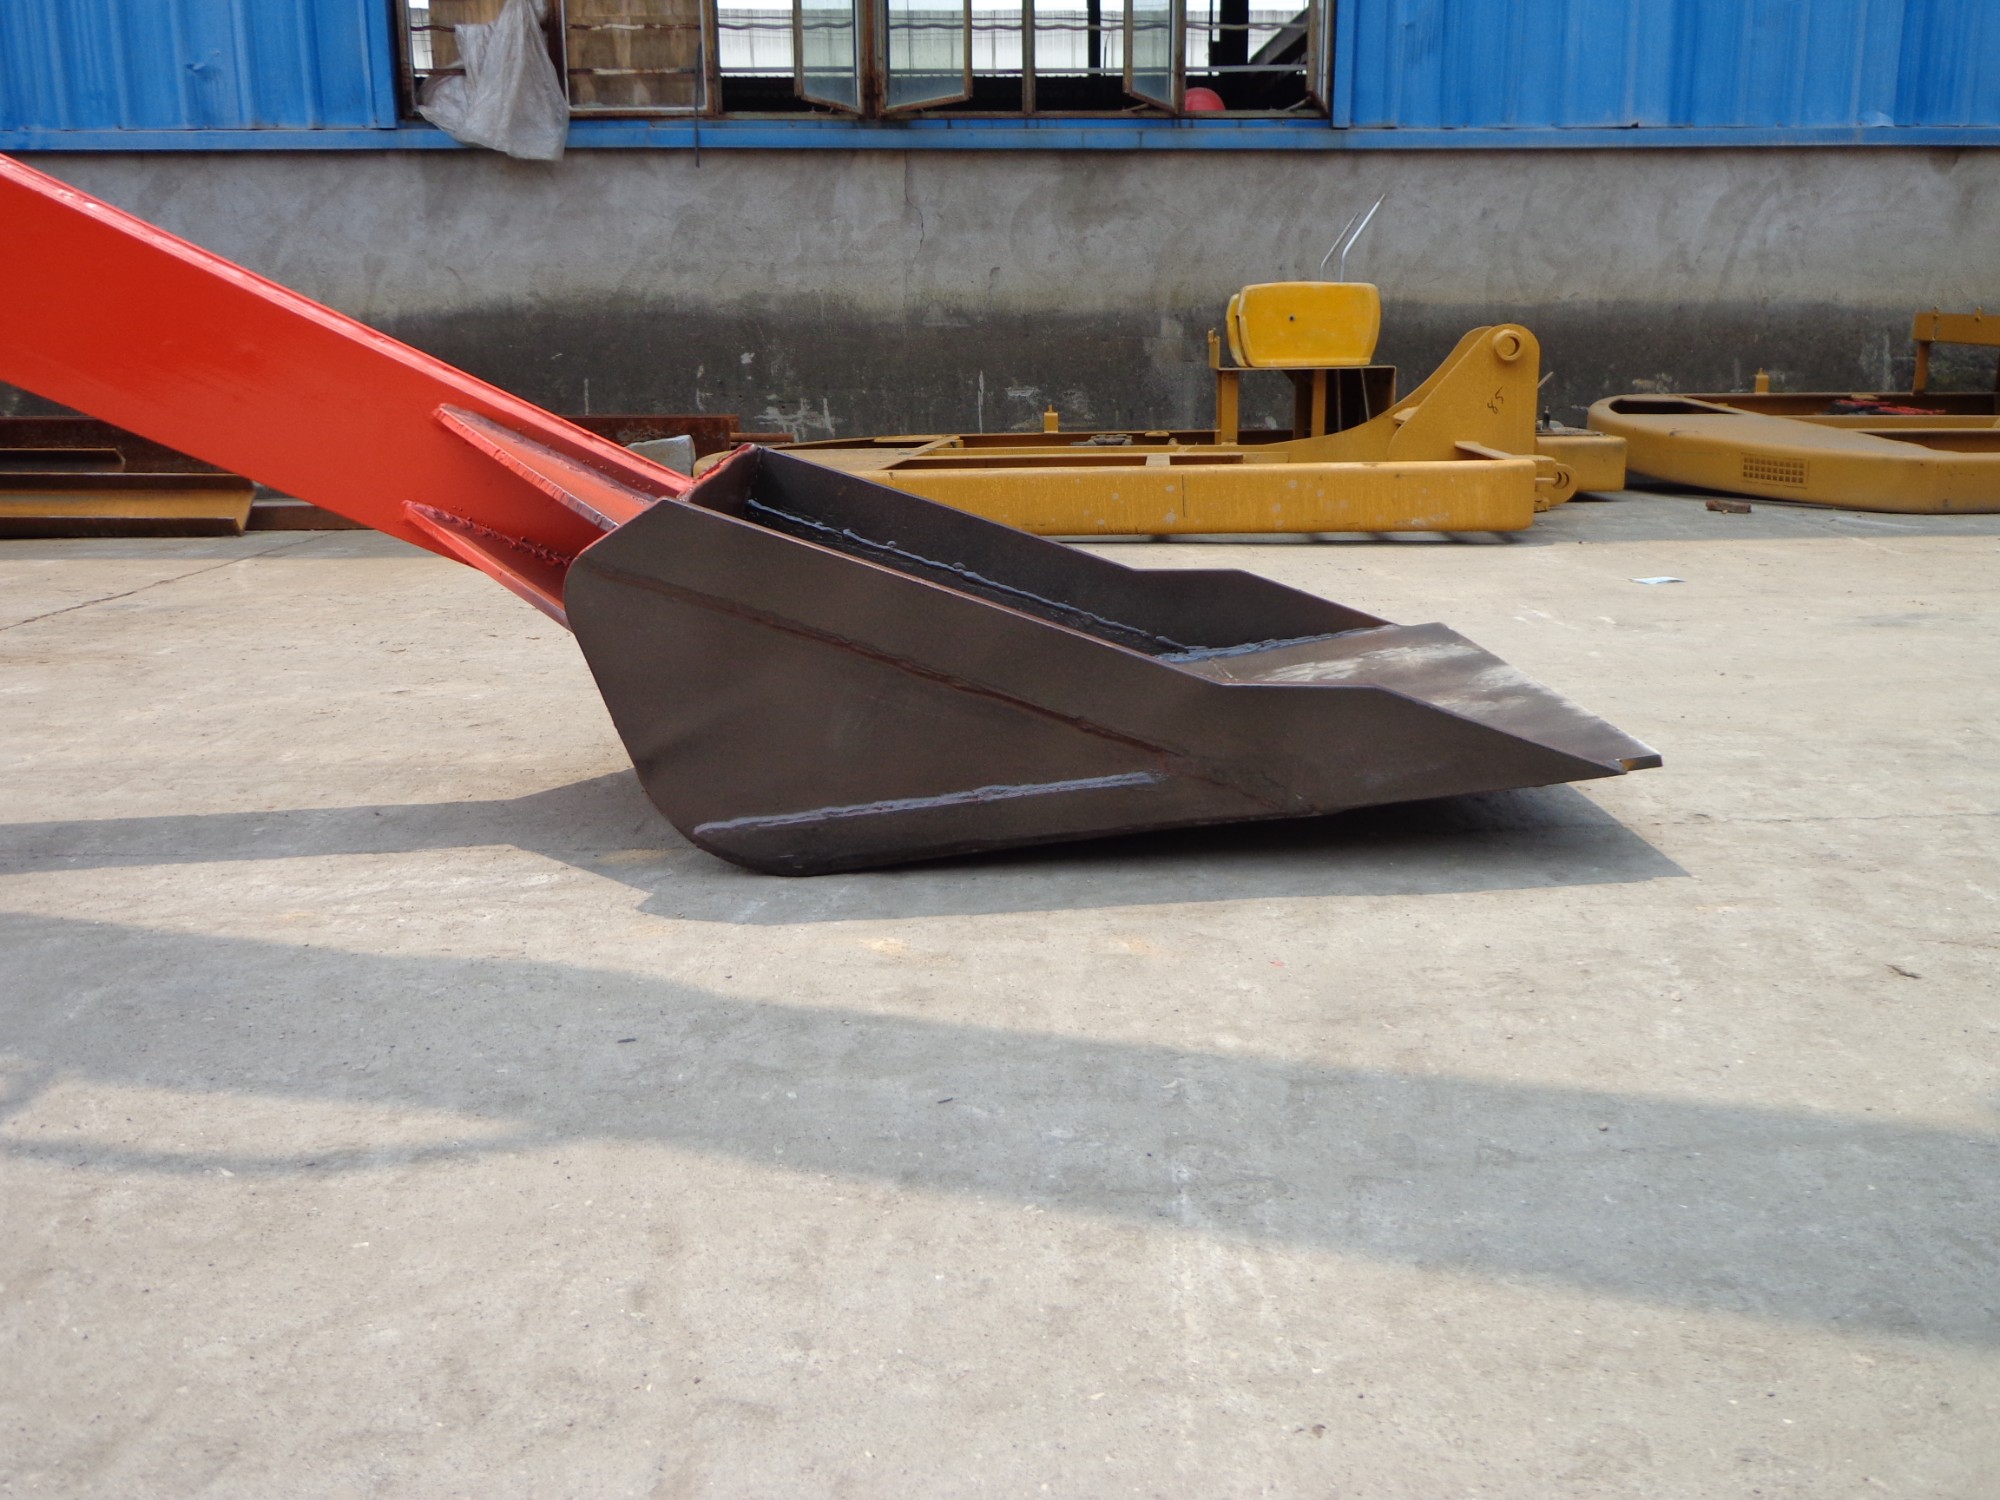 China Excavator with railroad material leveling machine Manufacturers, China Excavator with railroad material leveling machine Factory, Supply China Excavator with railroad material leveling machine